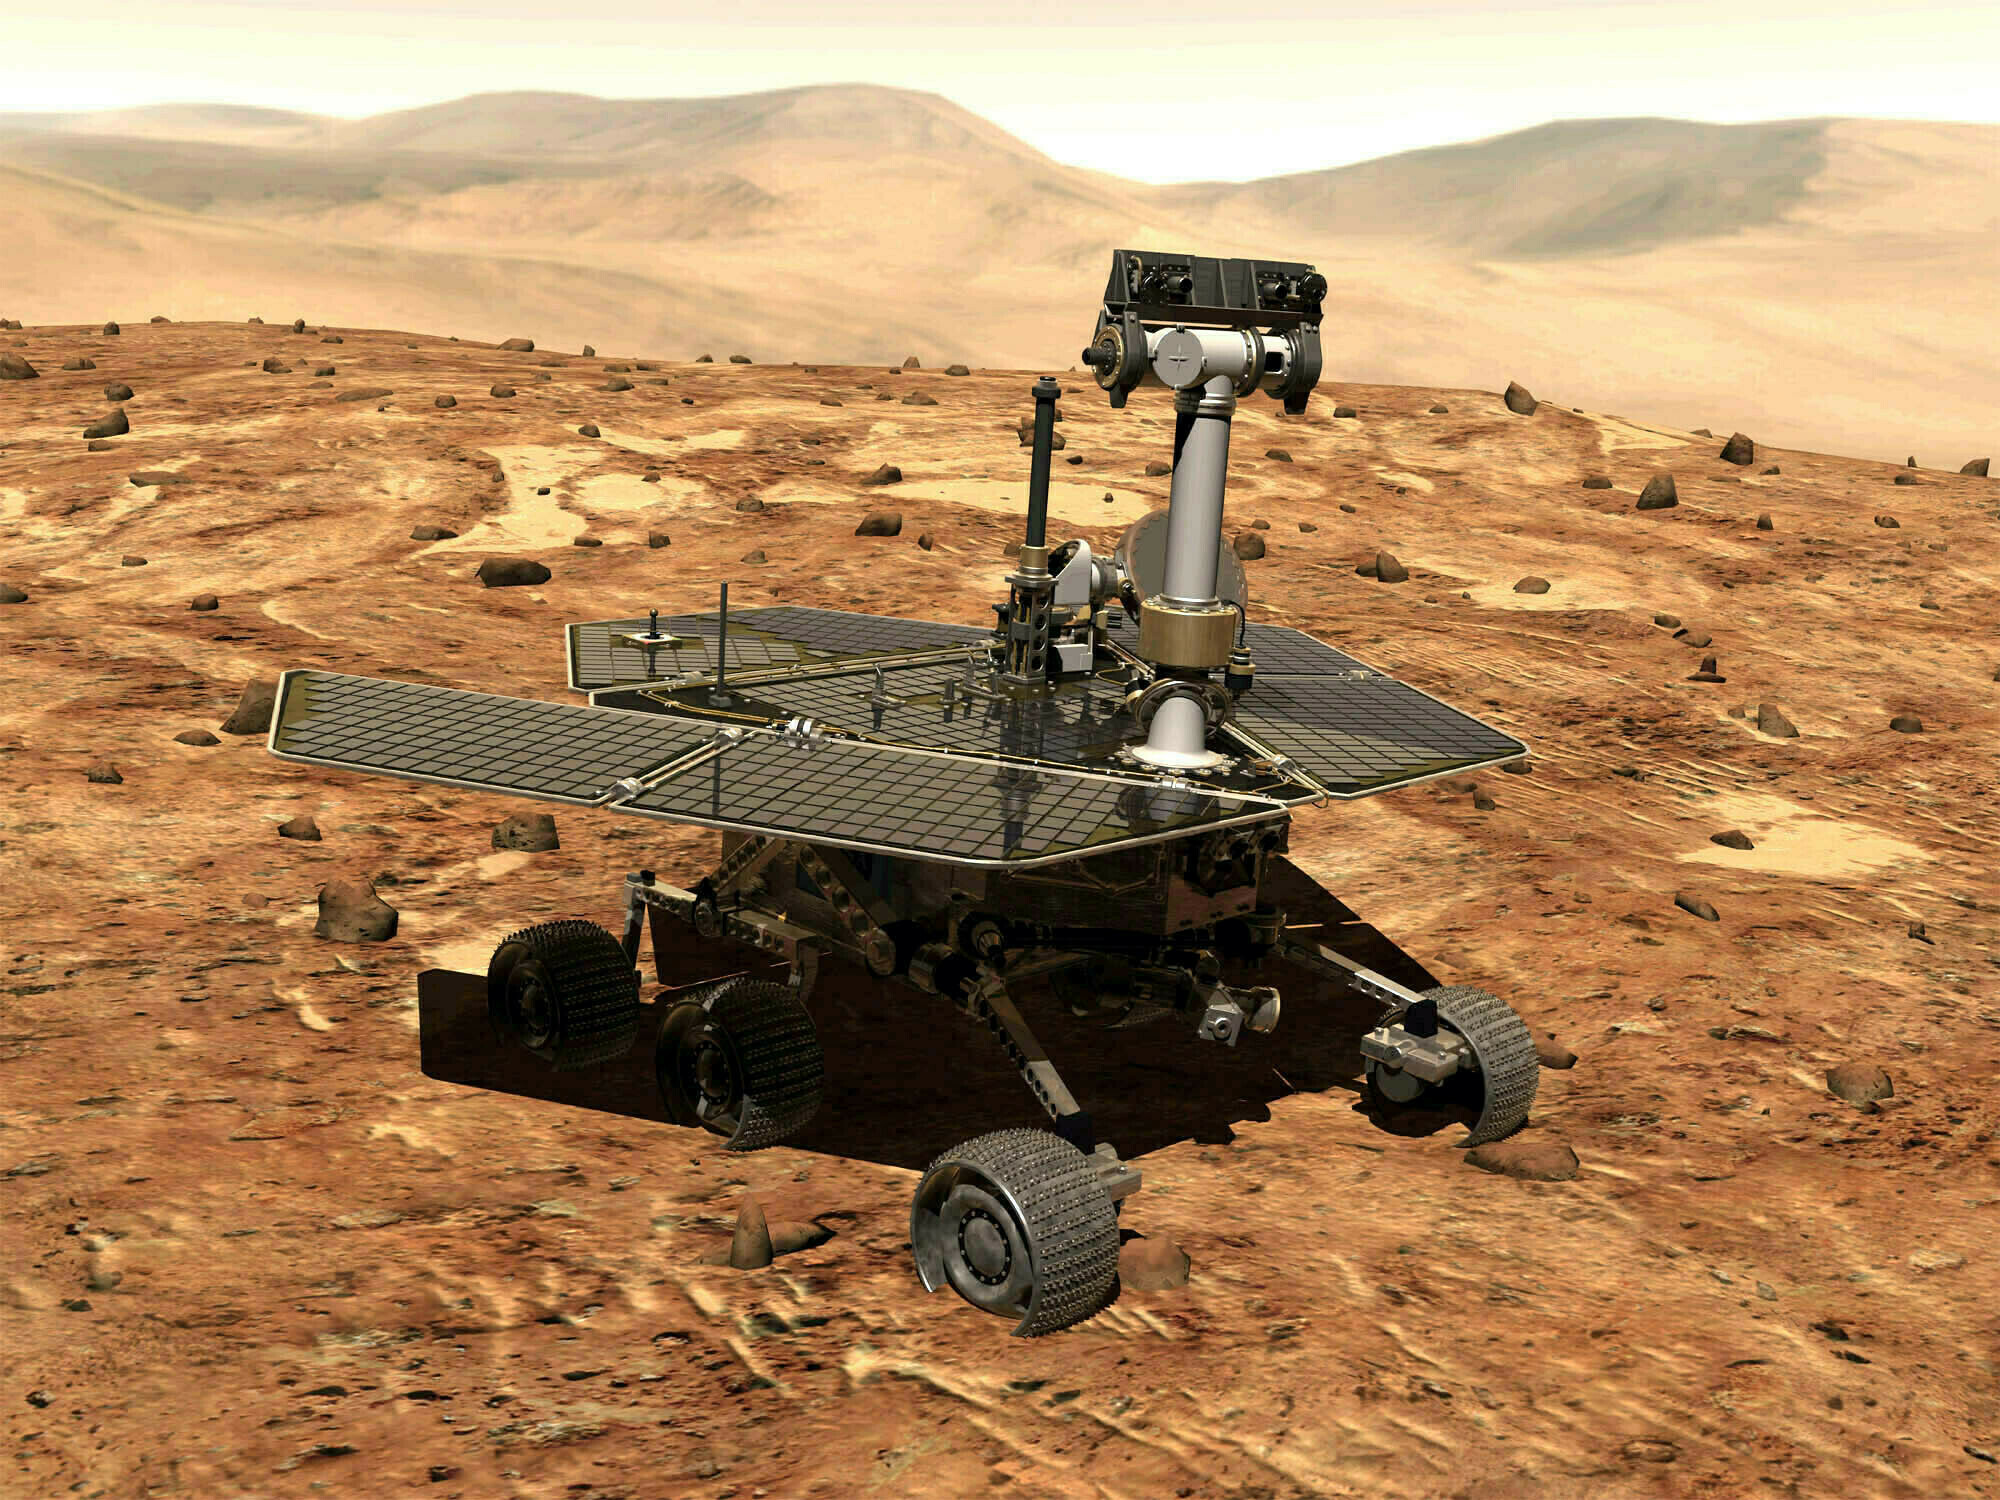 NASA announces 'death' of Opportunity Mars rover